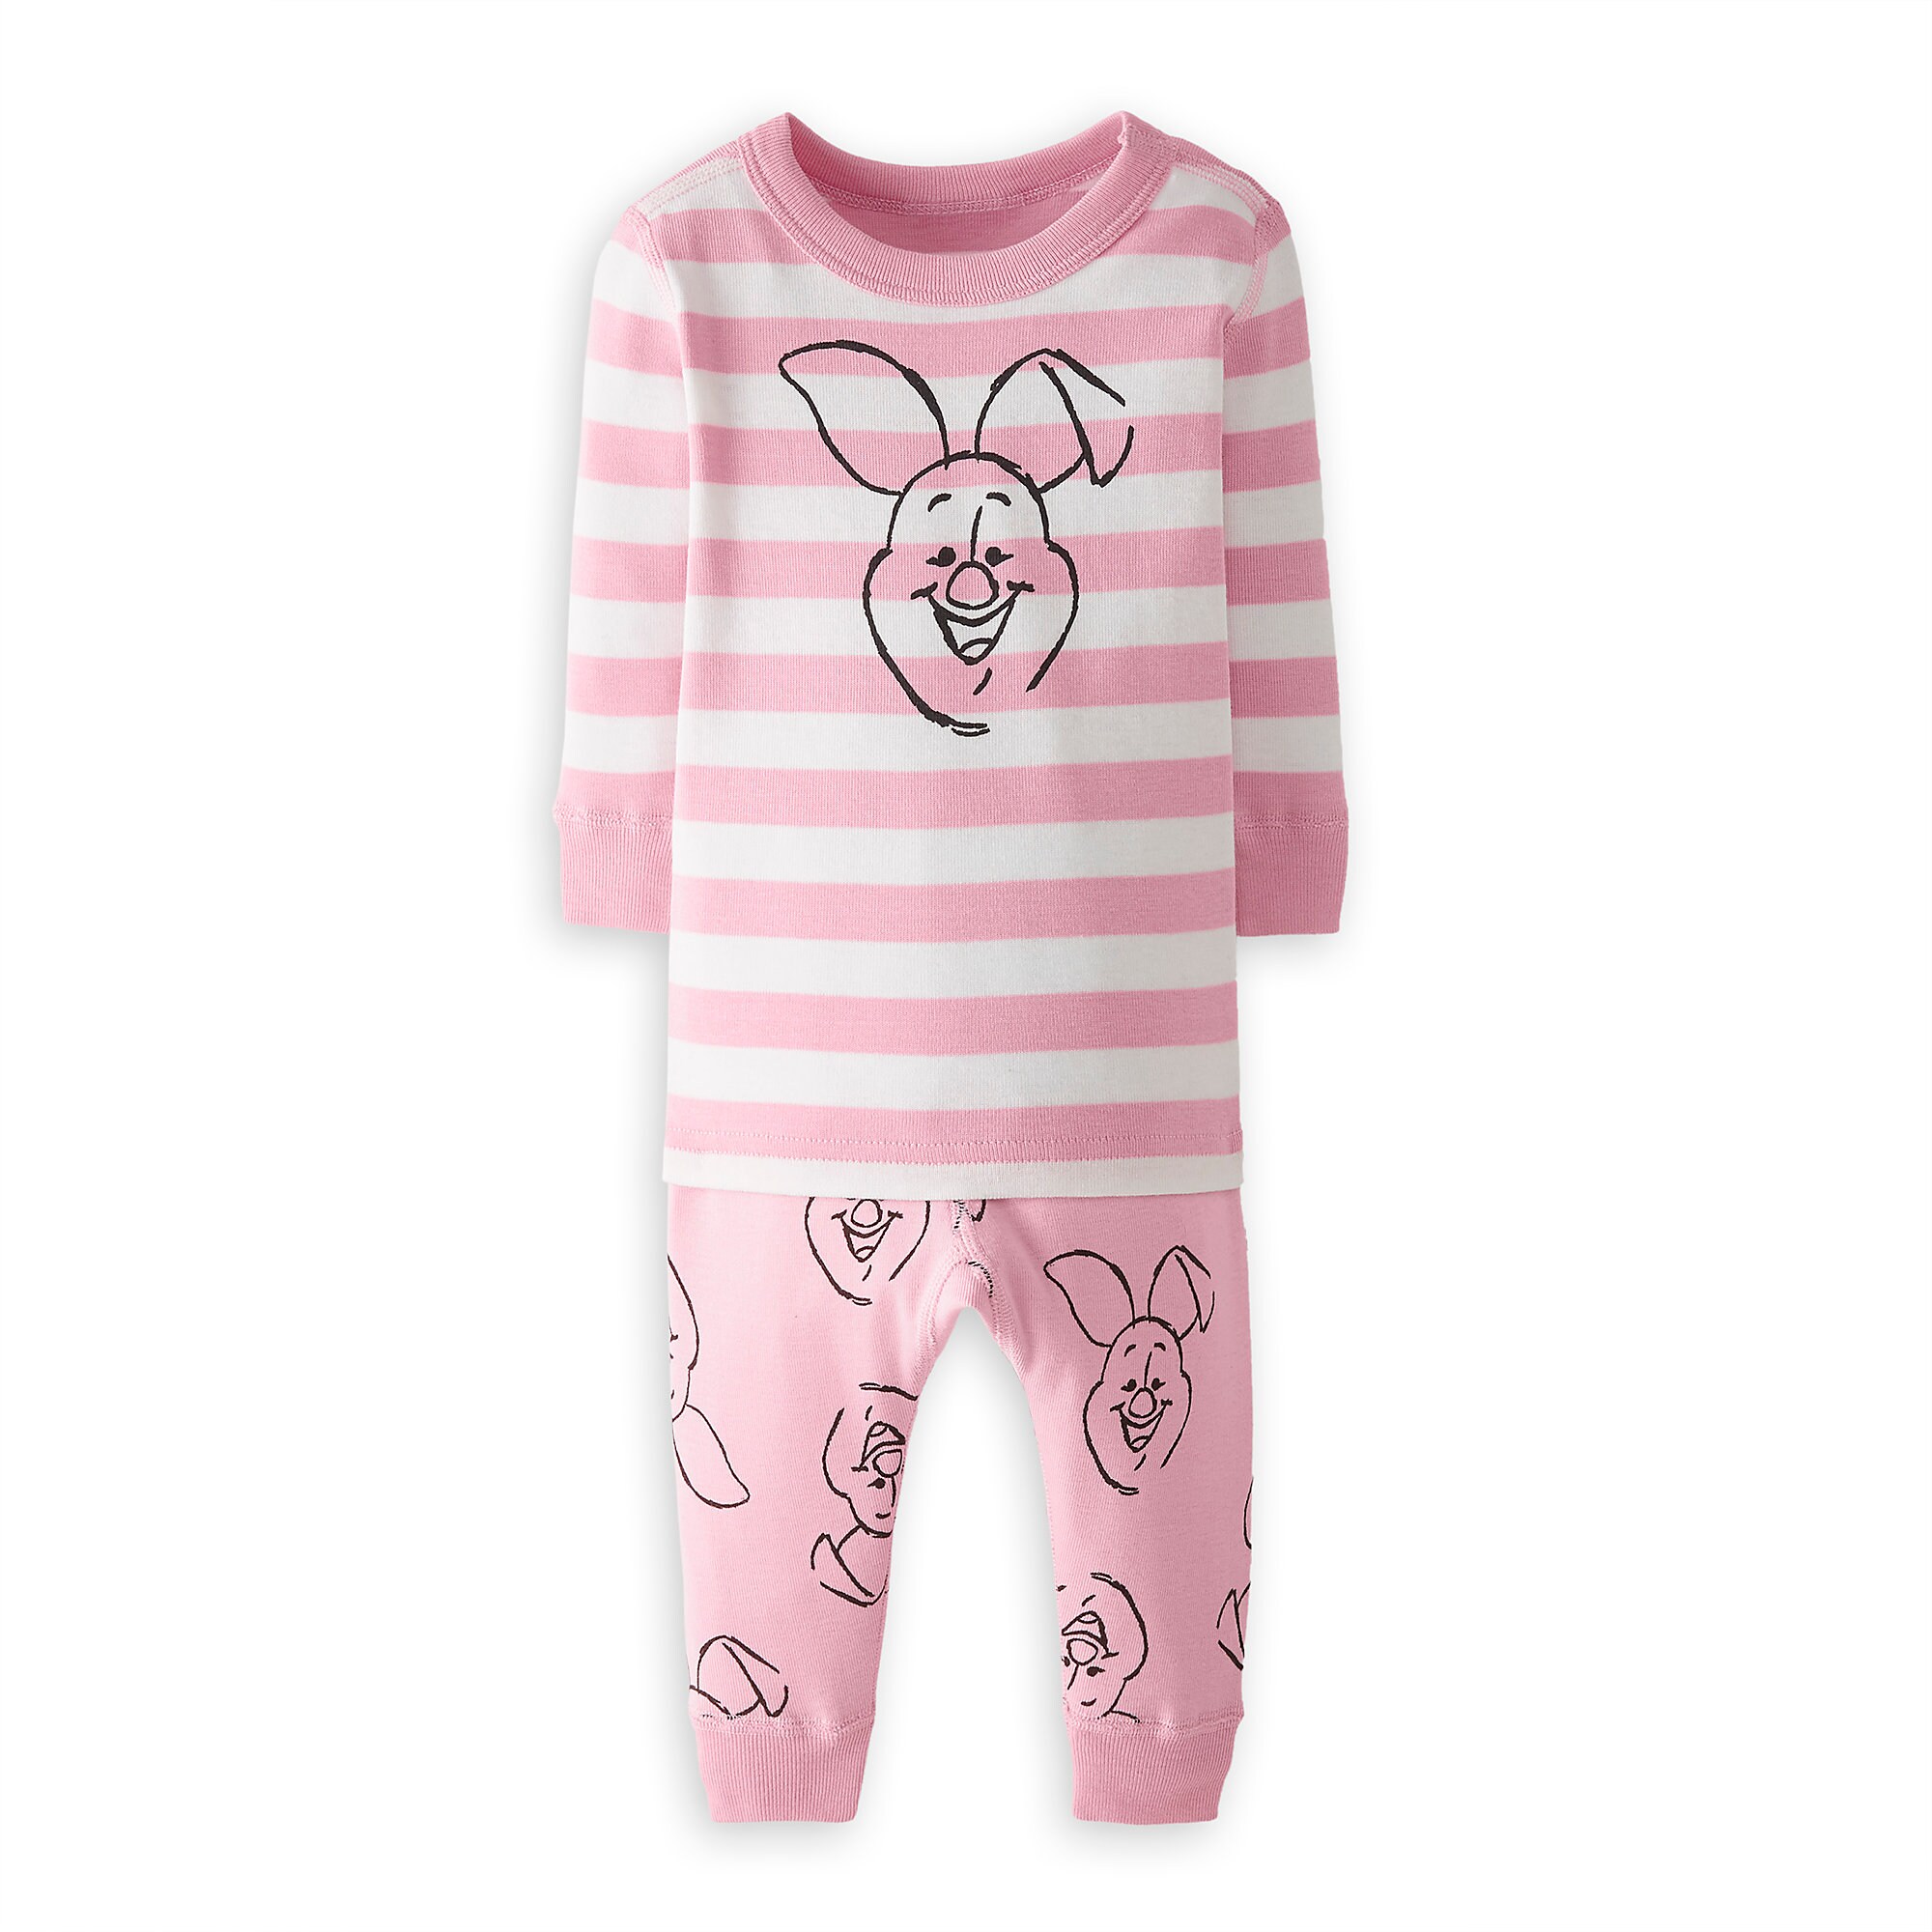 Piglet Organic Long John Pajama Set for Baby by Hanna Andersson